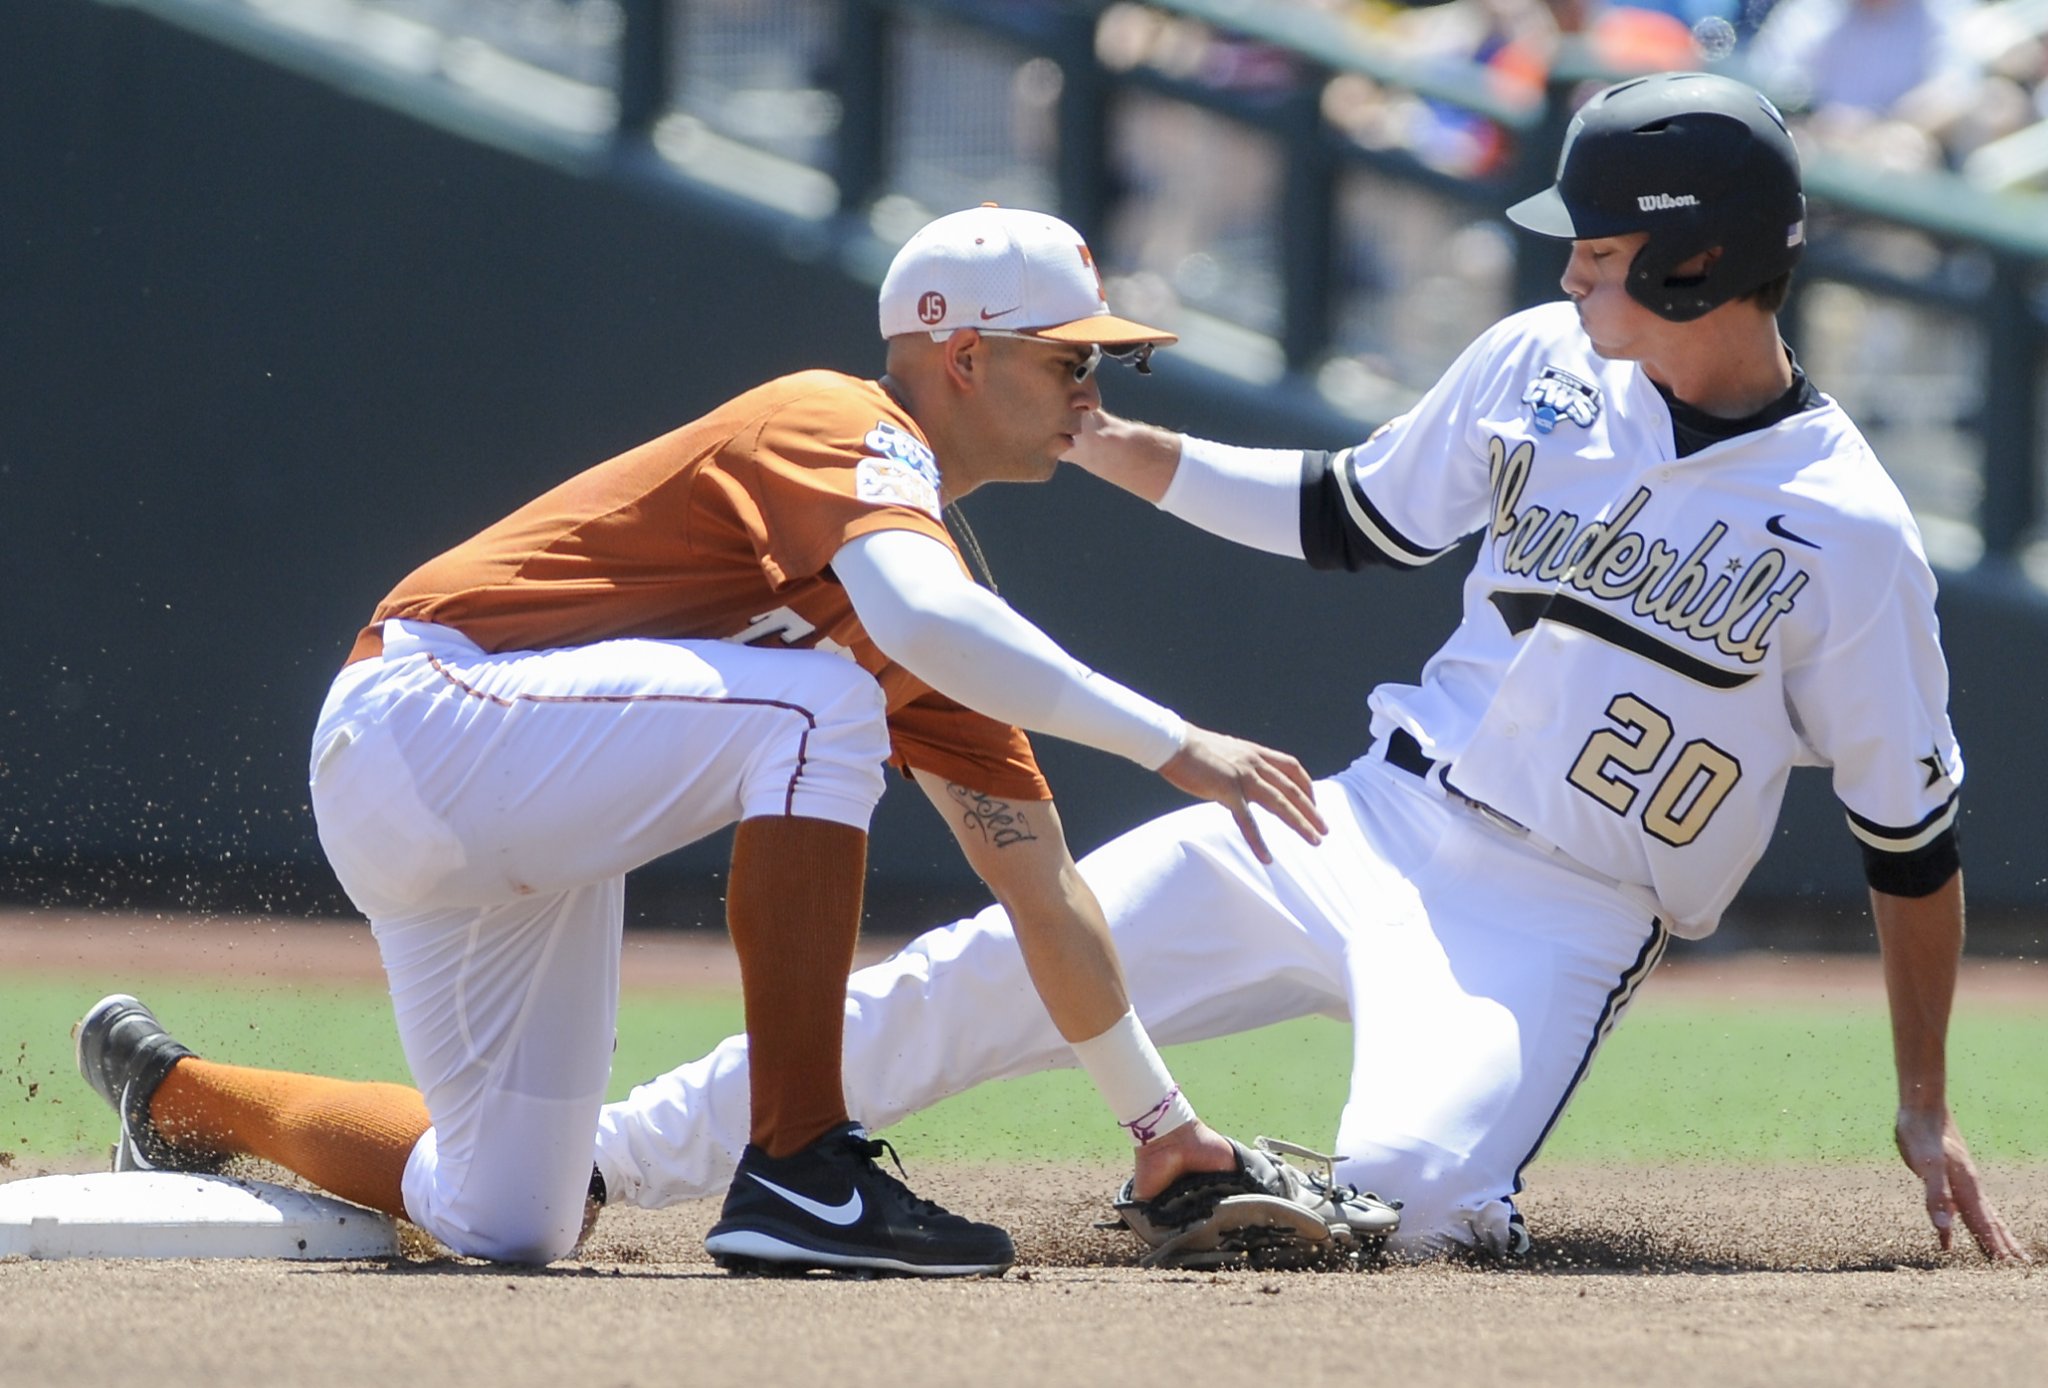 College World Series: College Baseball Showing Signs of a